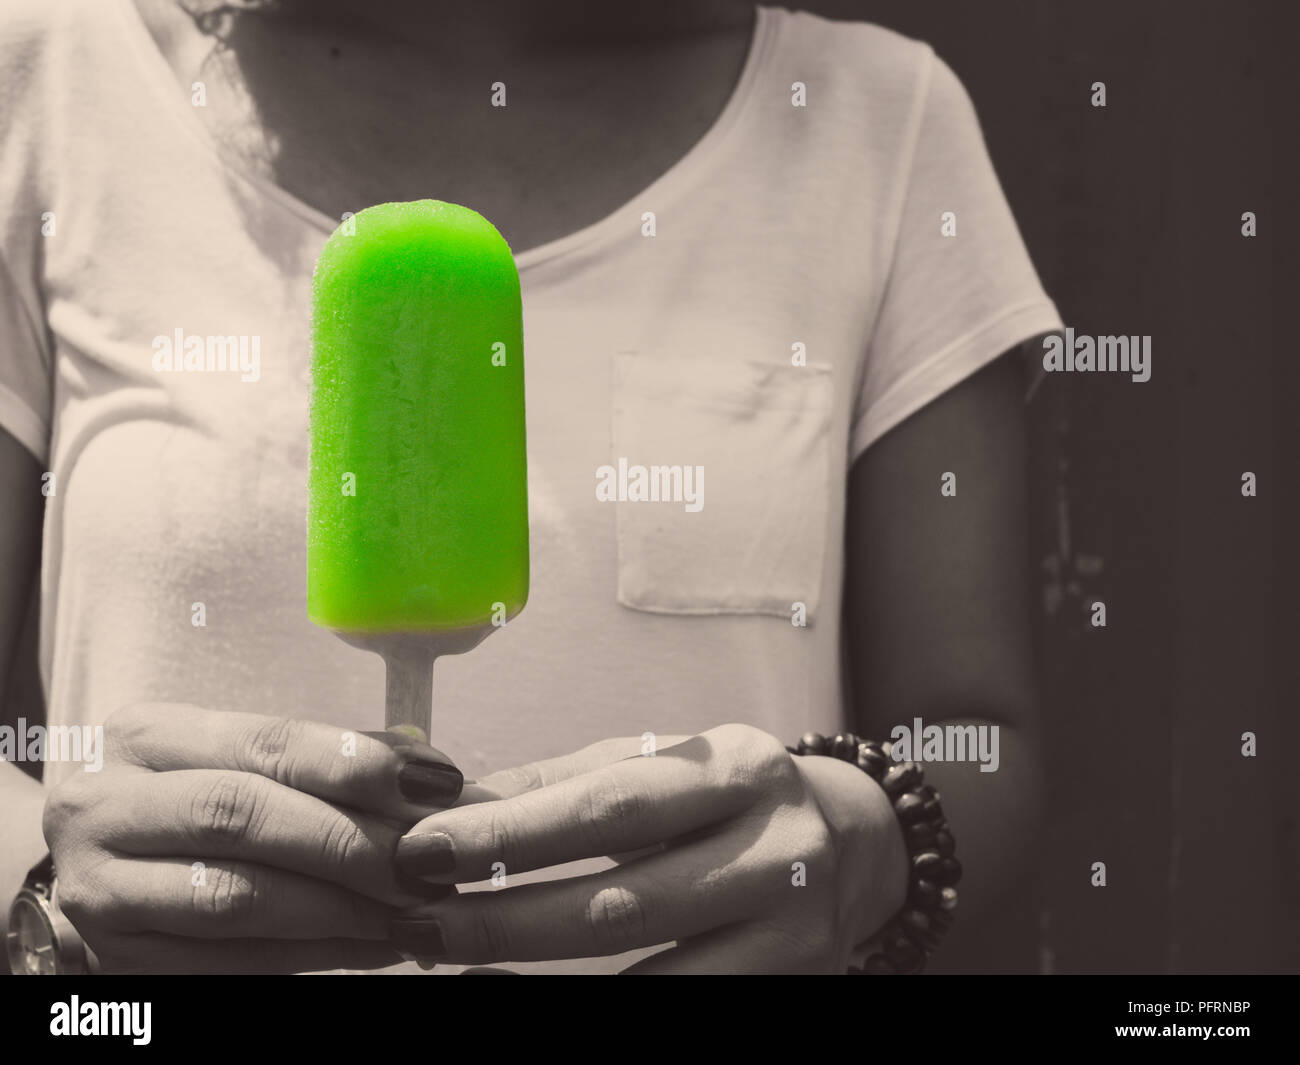 Woman Wearing White Shirt Holding Green Frozen Popsicle Ice Pop on Grunge Wall Background in Monochrome Art Style Stock Photo